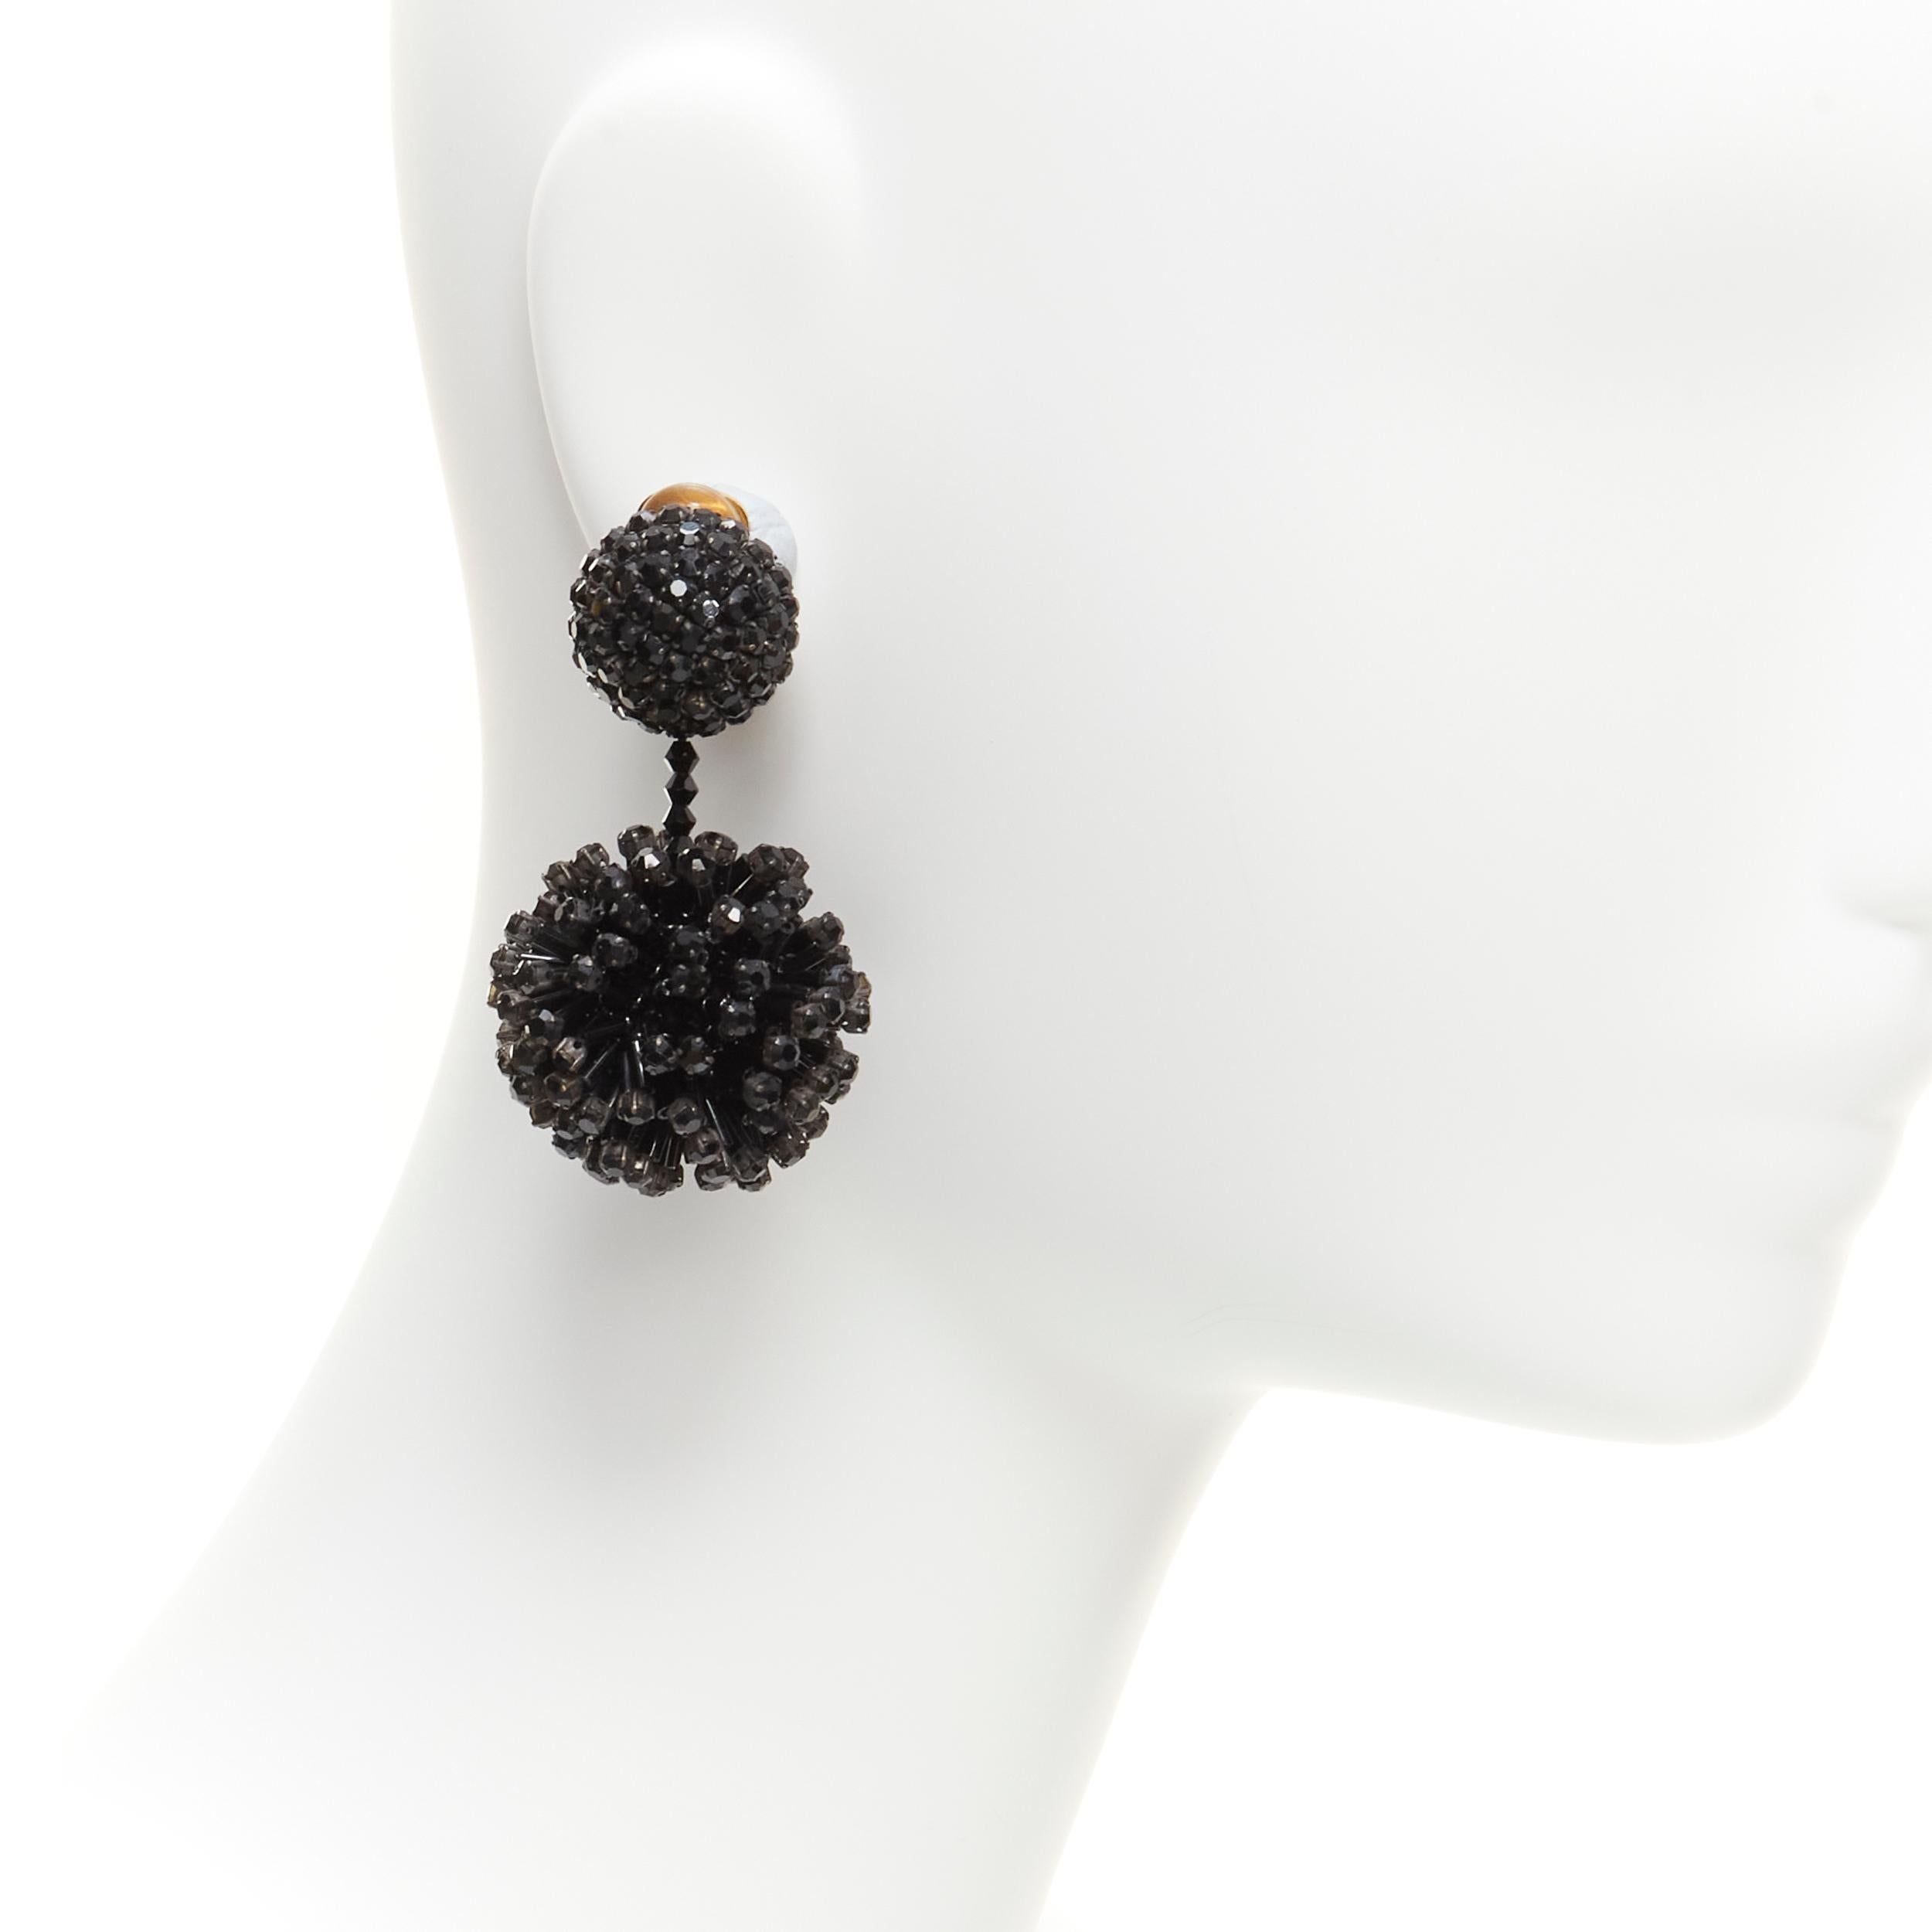 OSCAR DE LA RENTA black beaded crystal double ball drop clip on earrings
Reference: TGAS/C01475
Brand: Oscar De La Renta
Material: Plastic
Color: Black
Pattern: Solid
Closure: Clip On
Estimated Retail Price: USD 370
Made in: